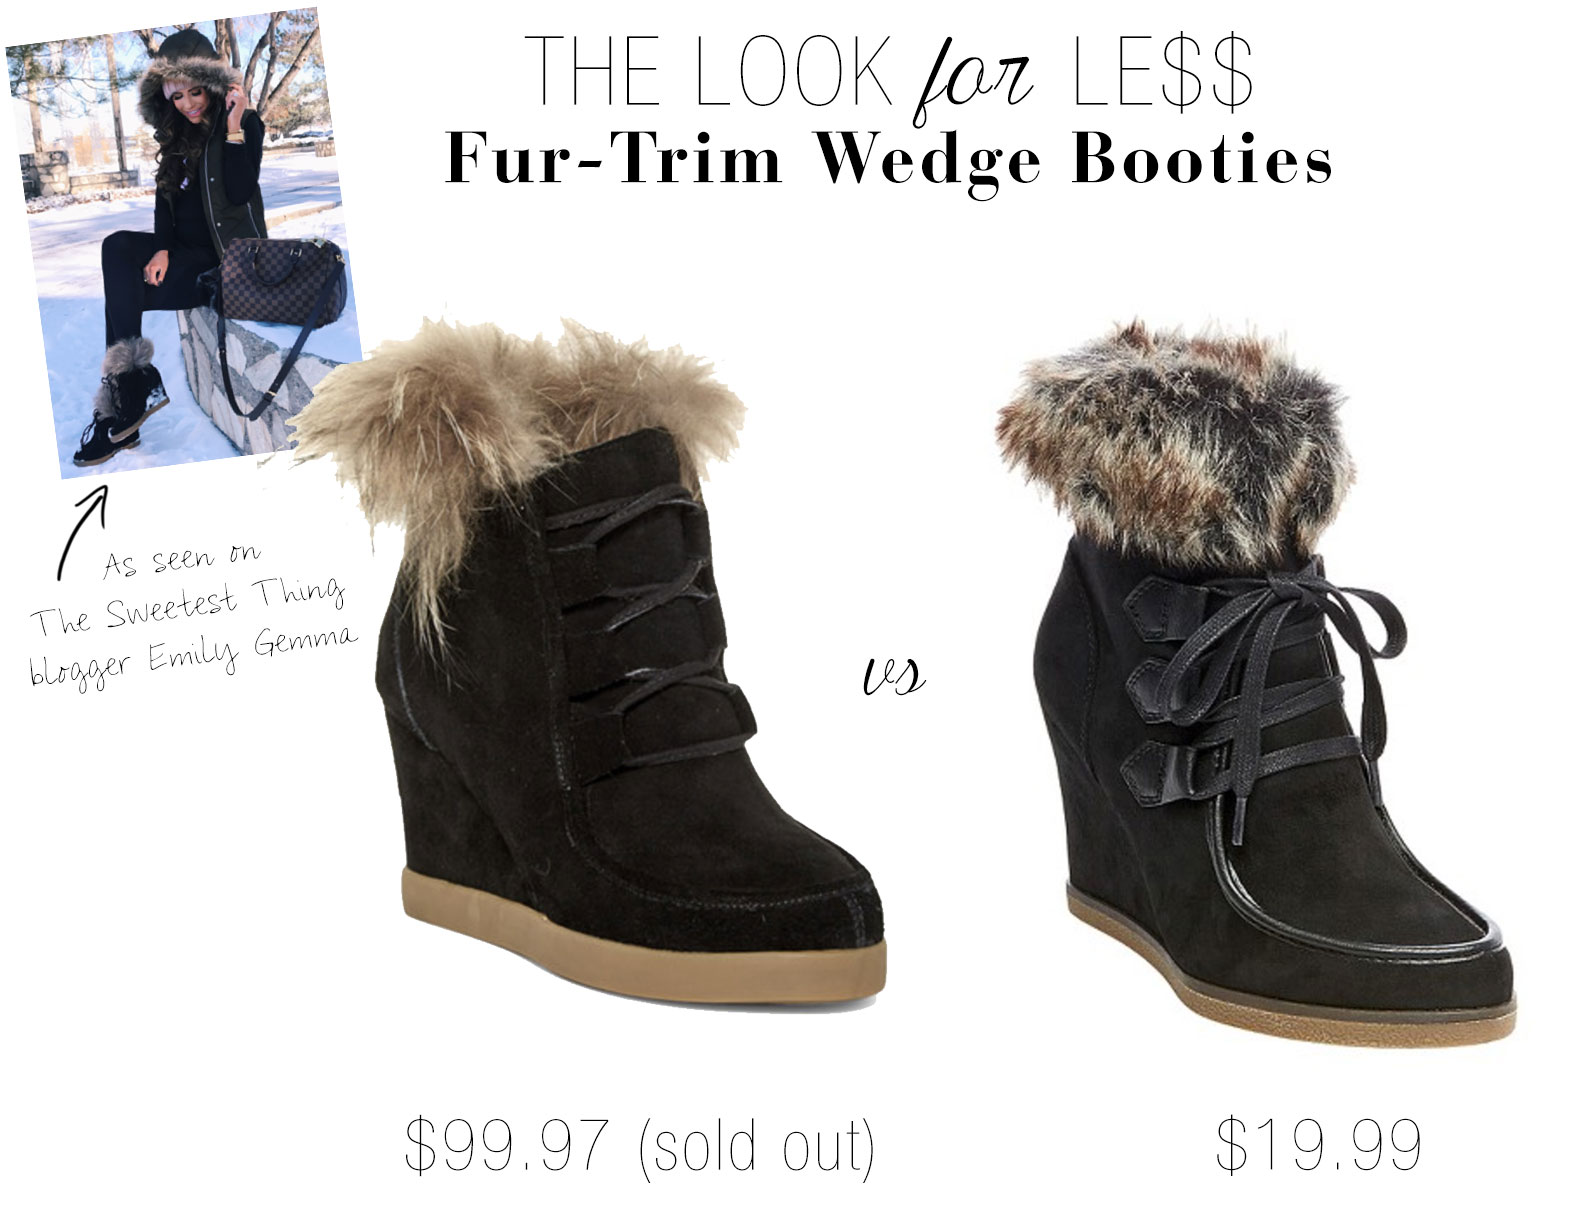 Find out where to buy the cutest winter boots under $20!